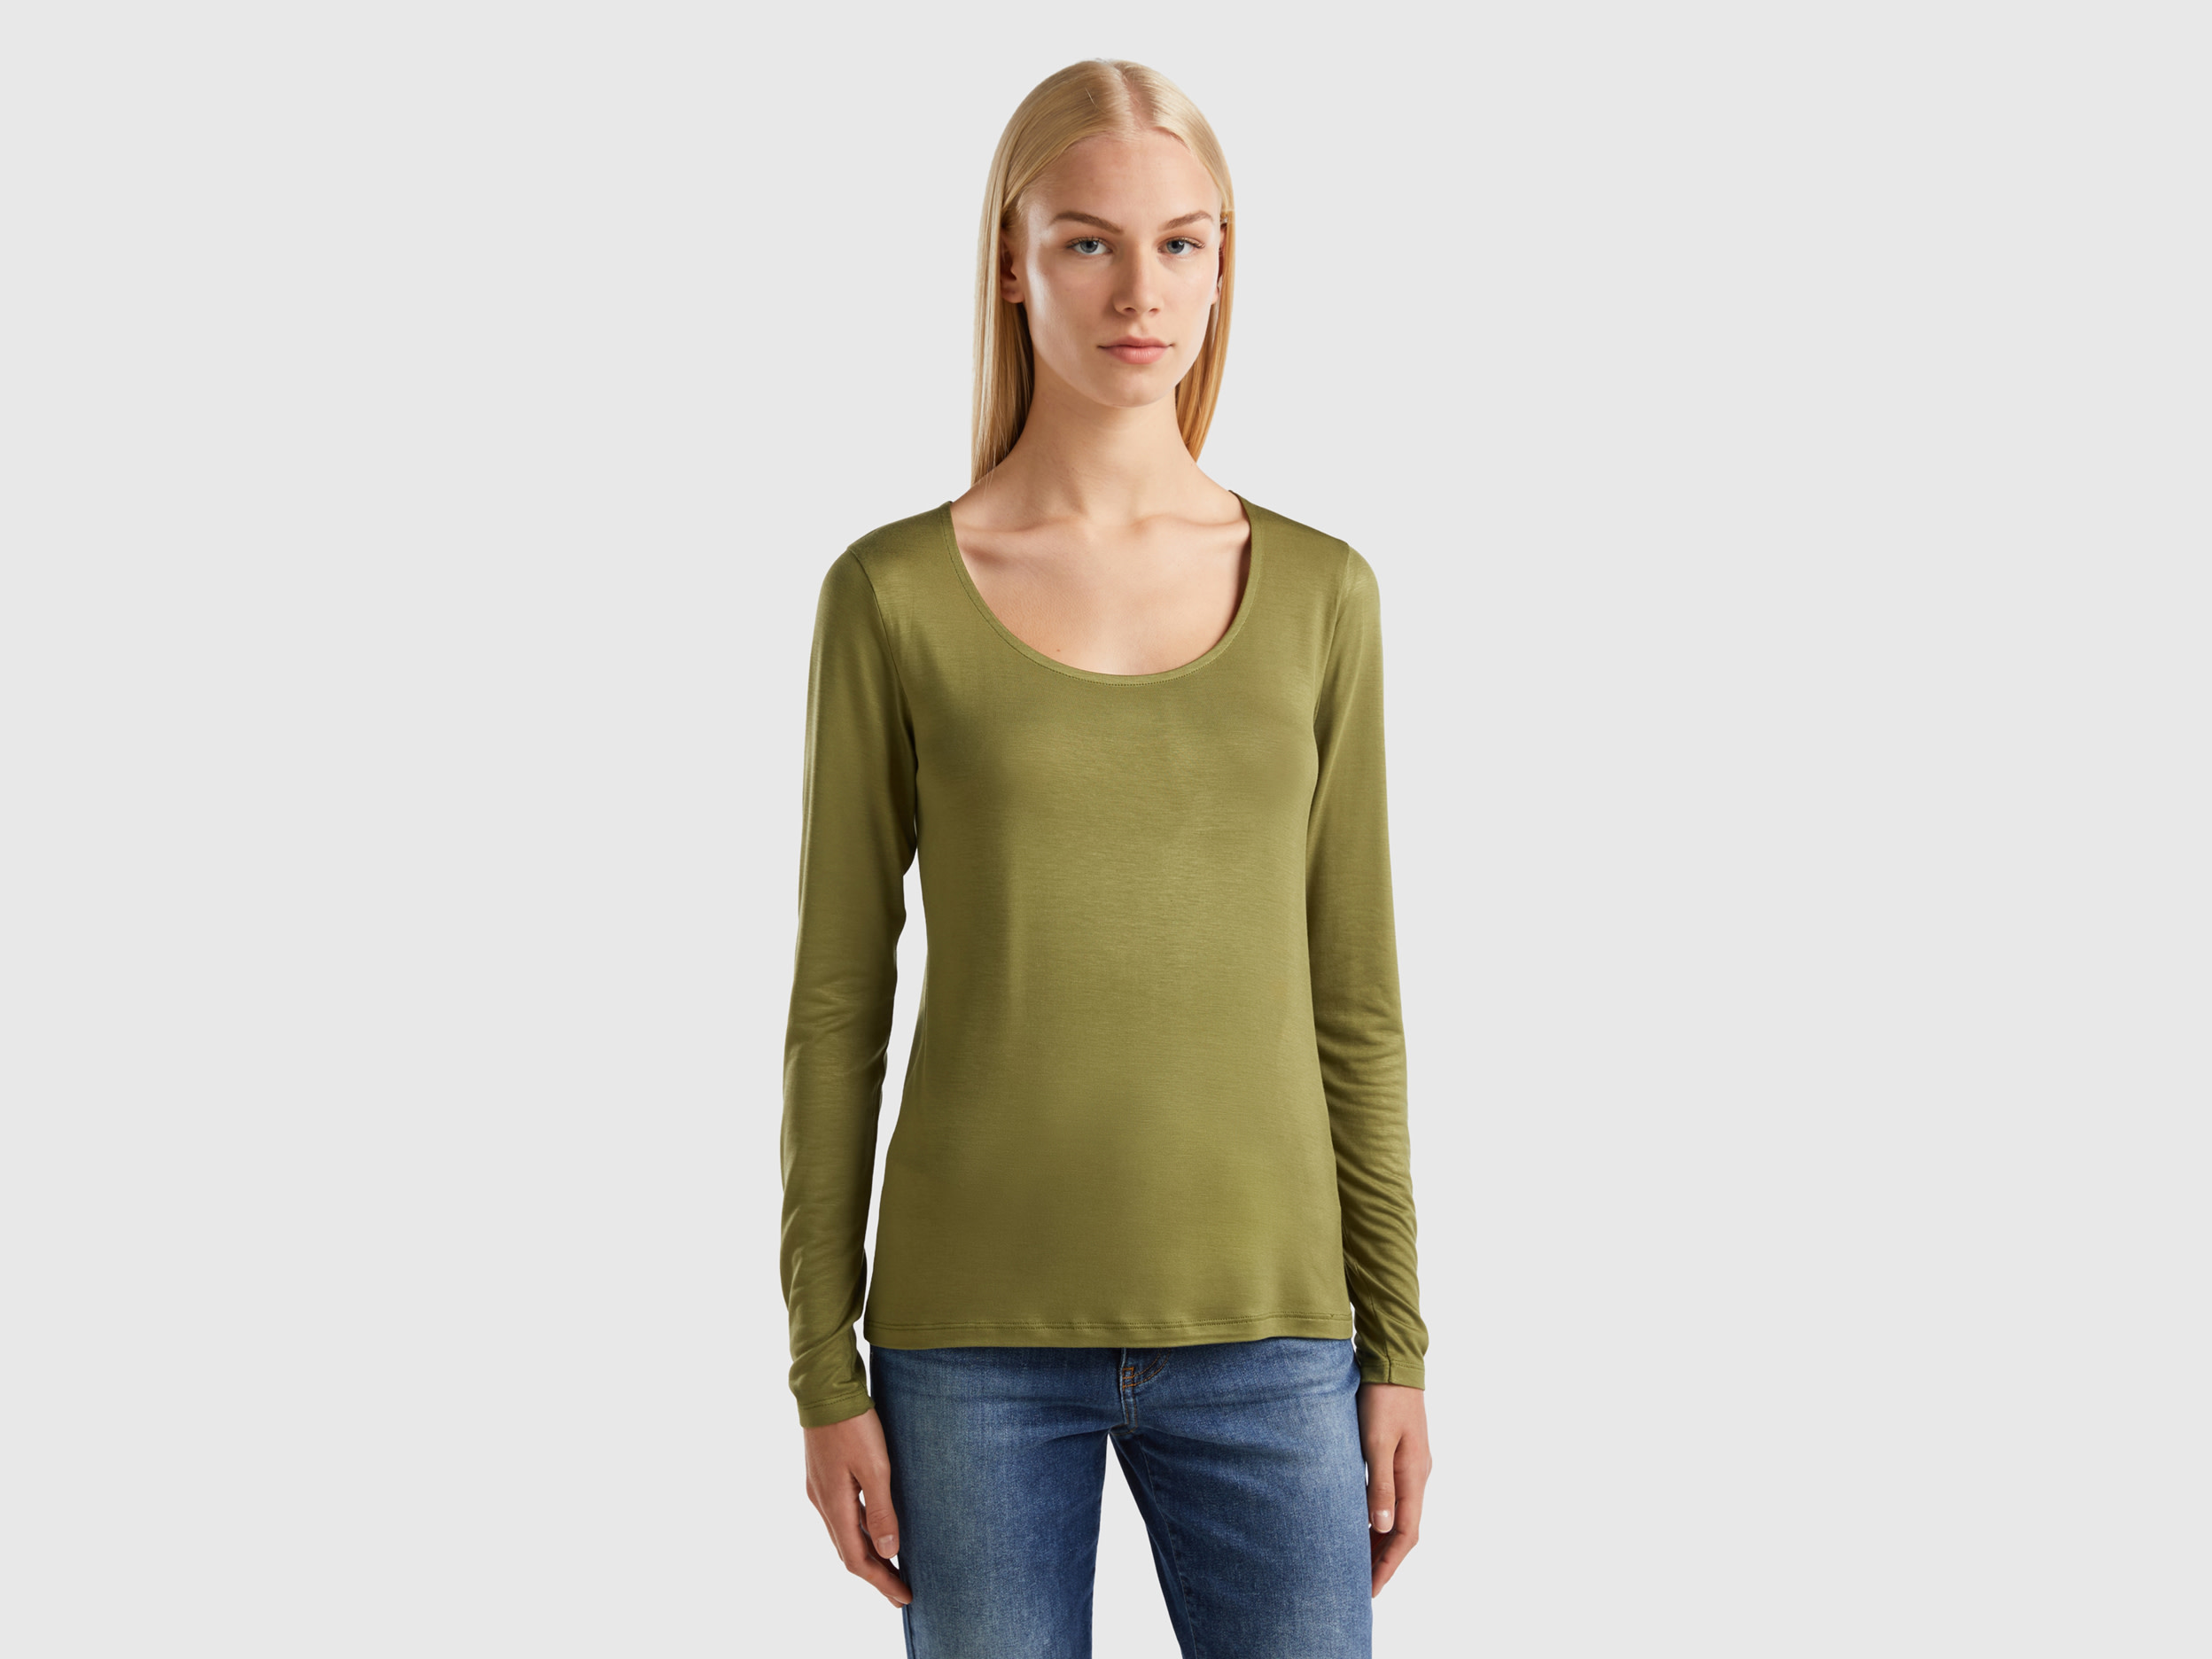 Benetton, T-shirt In Sustainable Stretch Viscose, size L, Military Green, Women